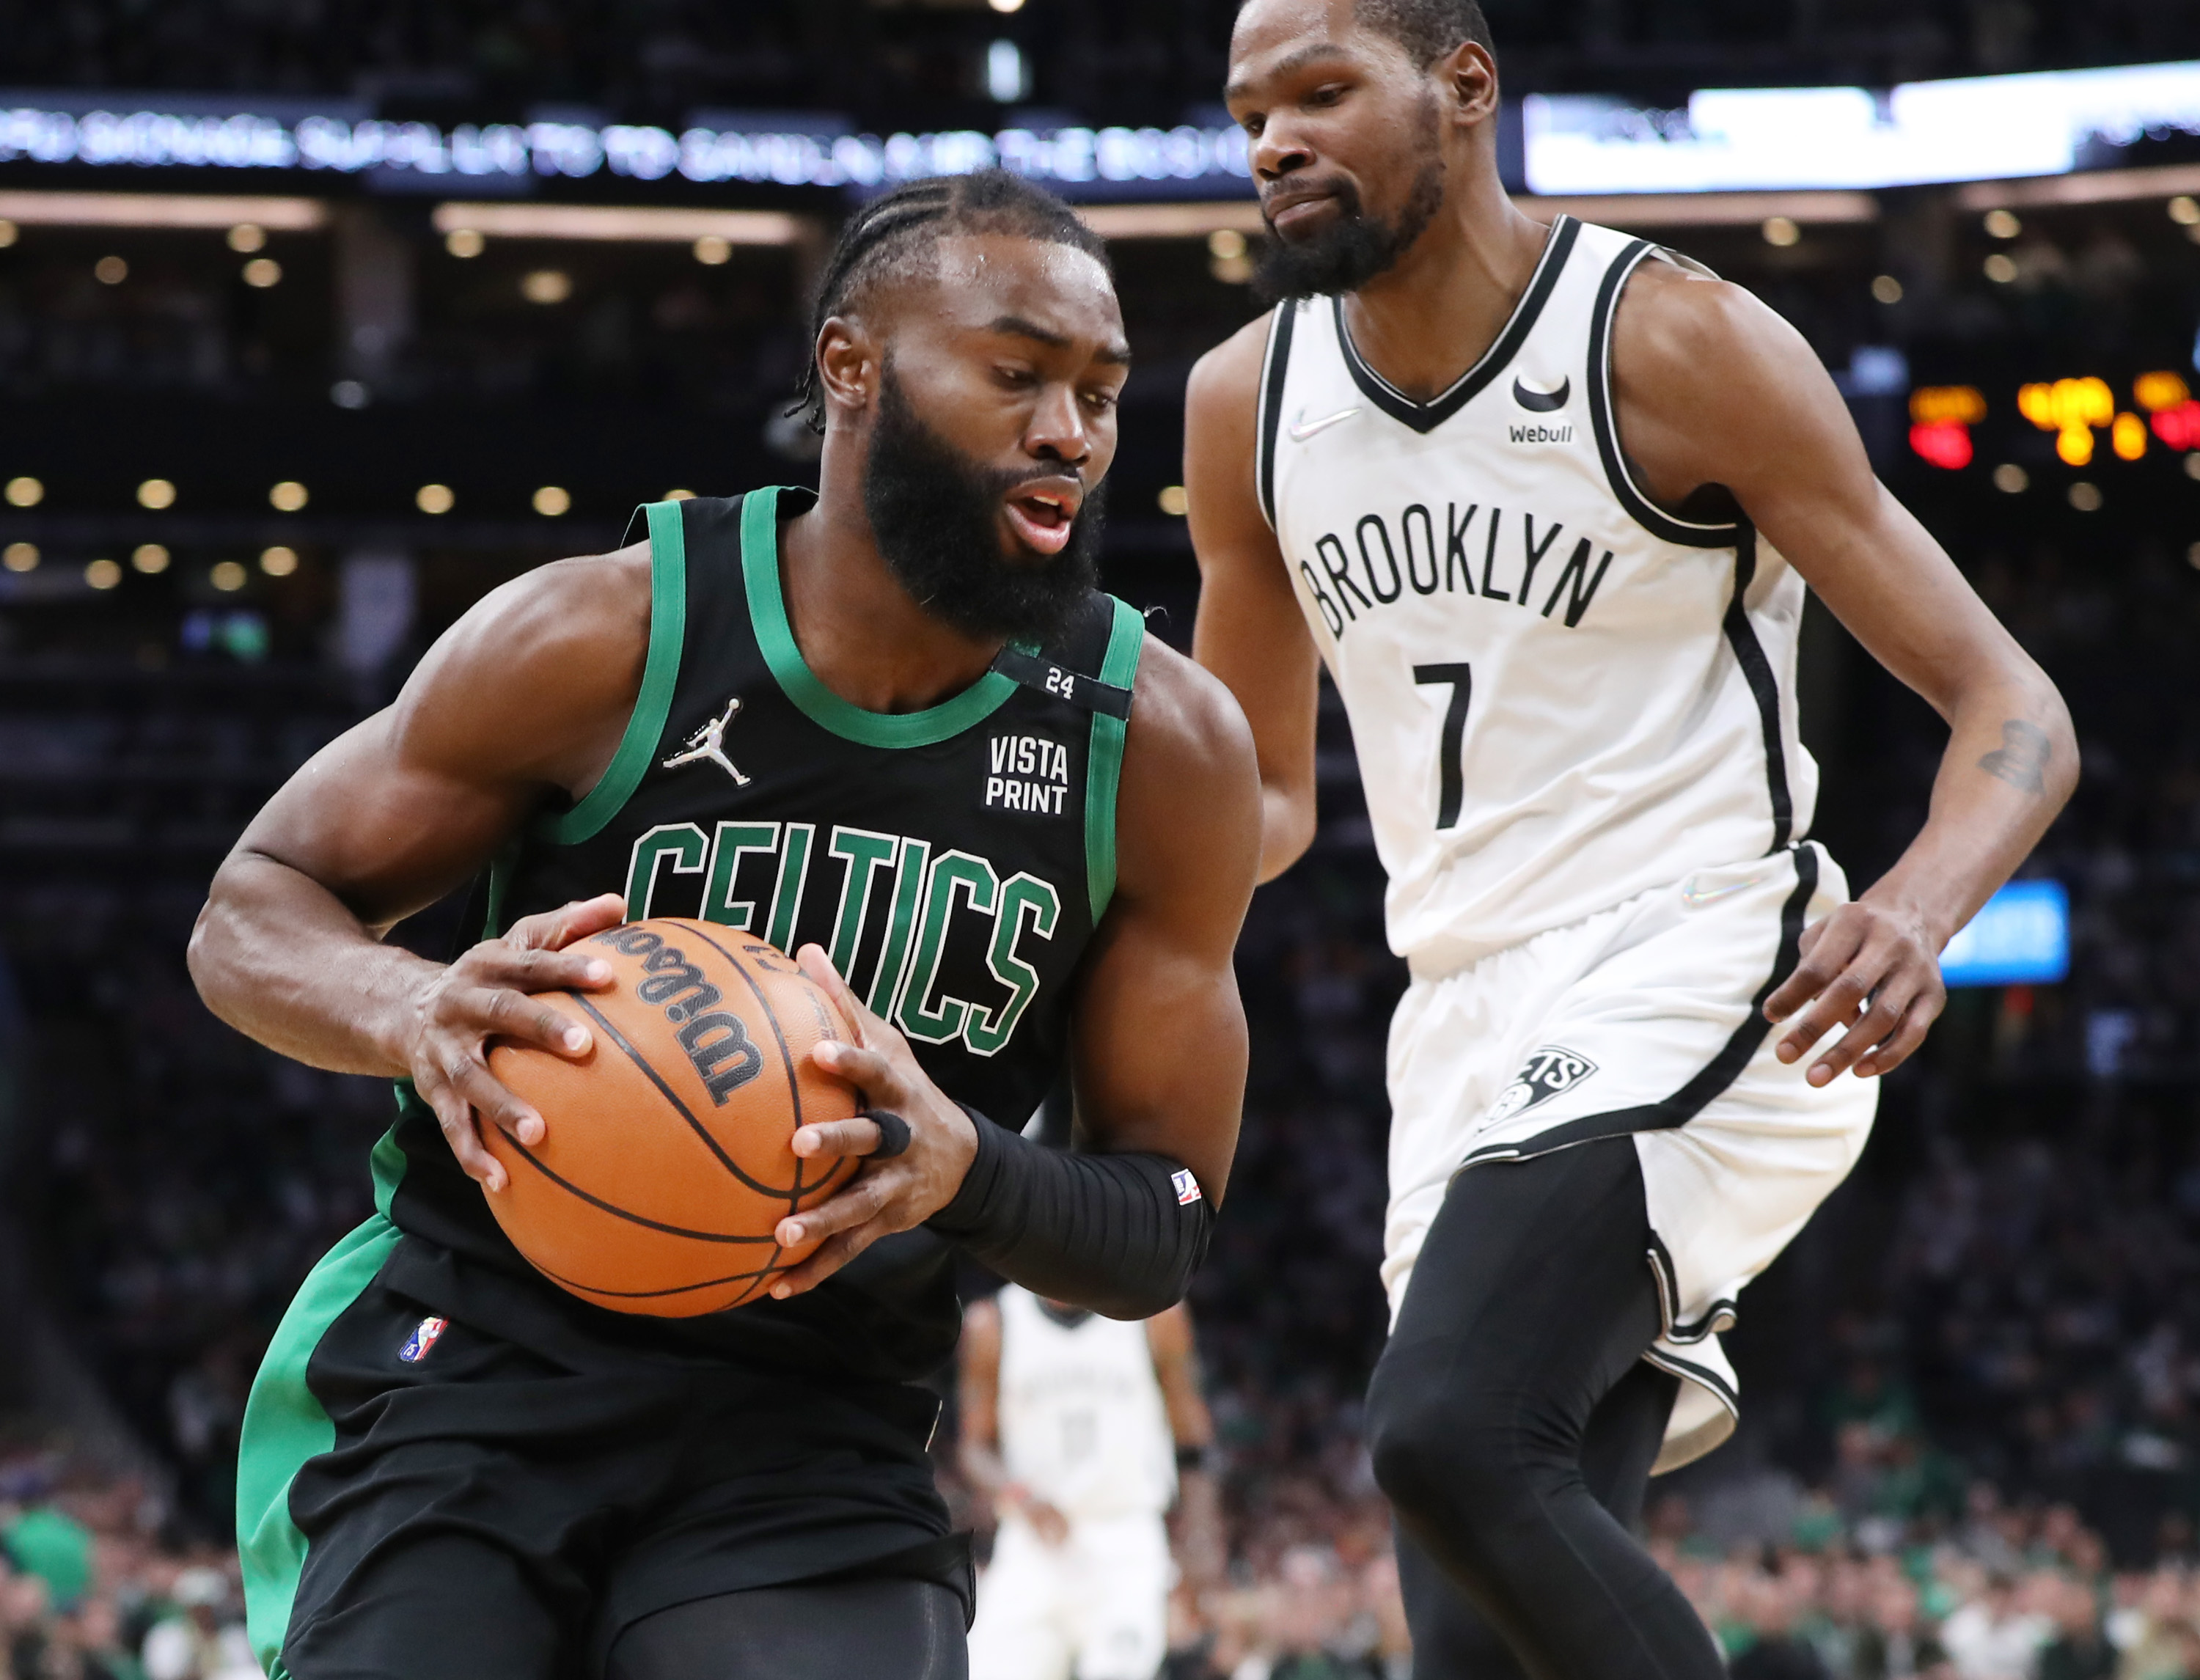 Boston Celtics guard Jaylen Brown grabs a rebound defended by Brooklyn Nets forward Kevin Durant.